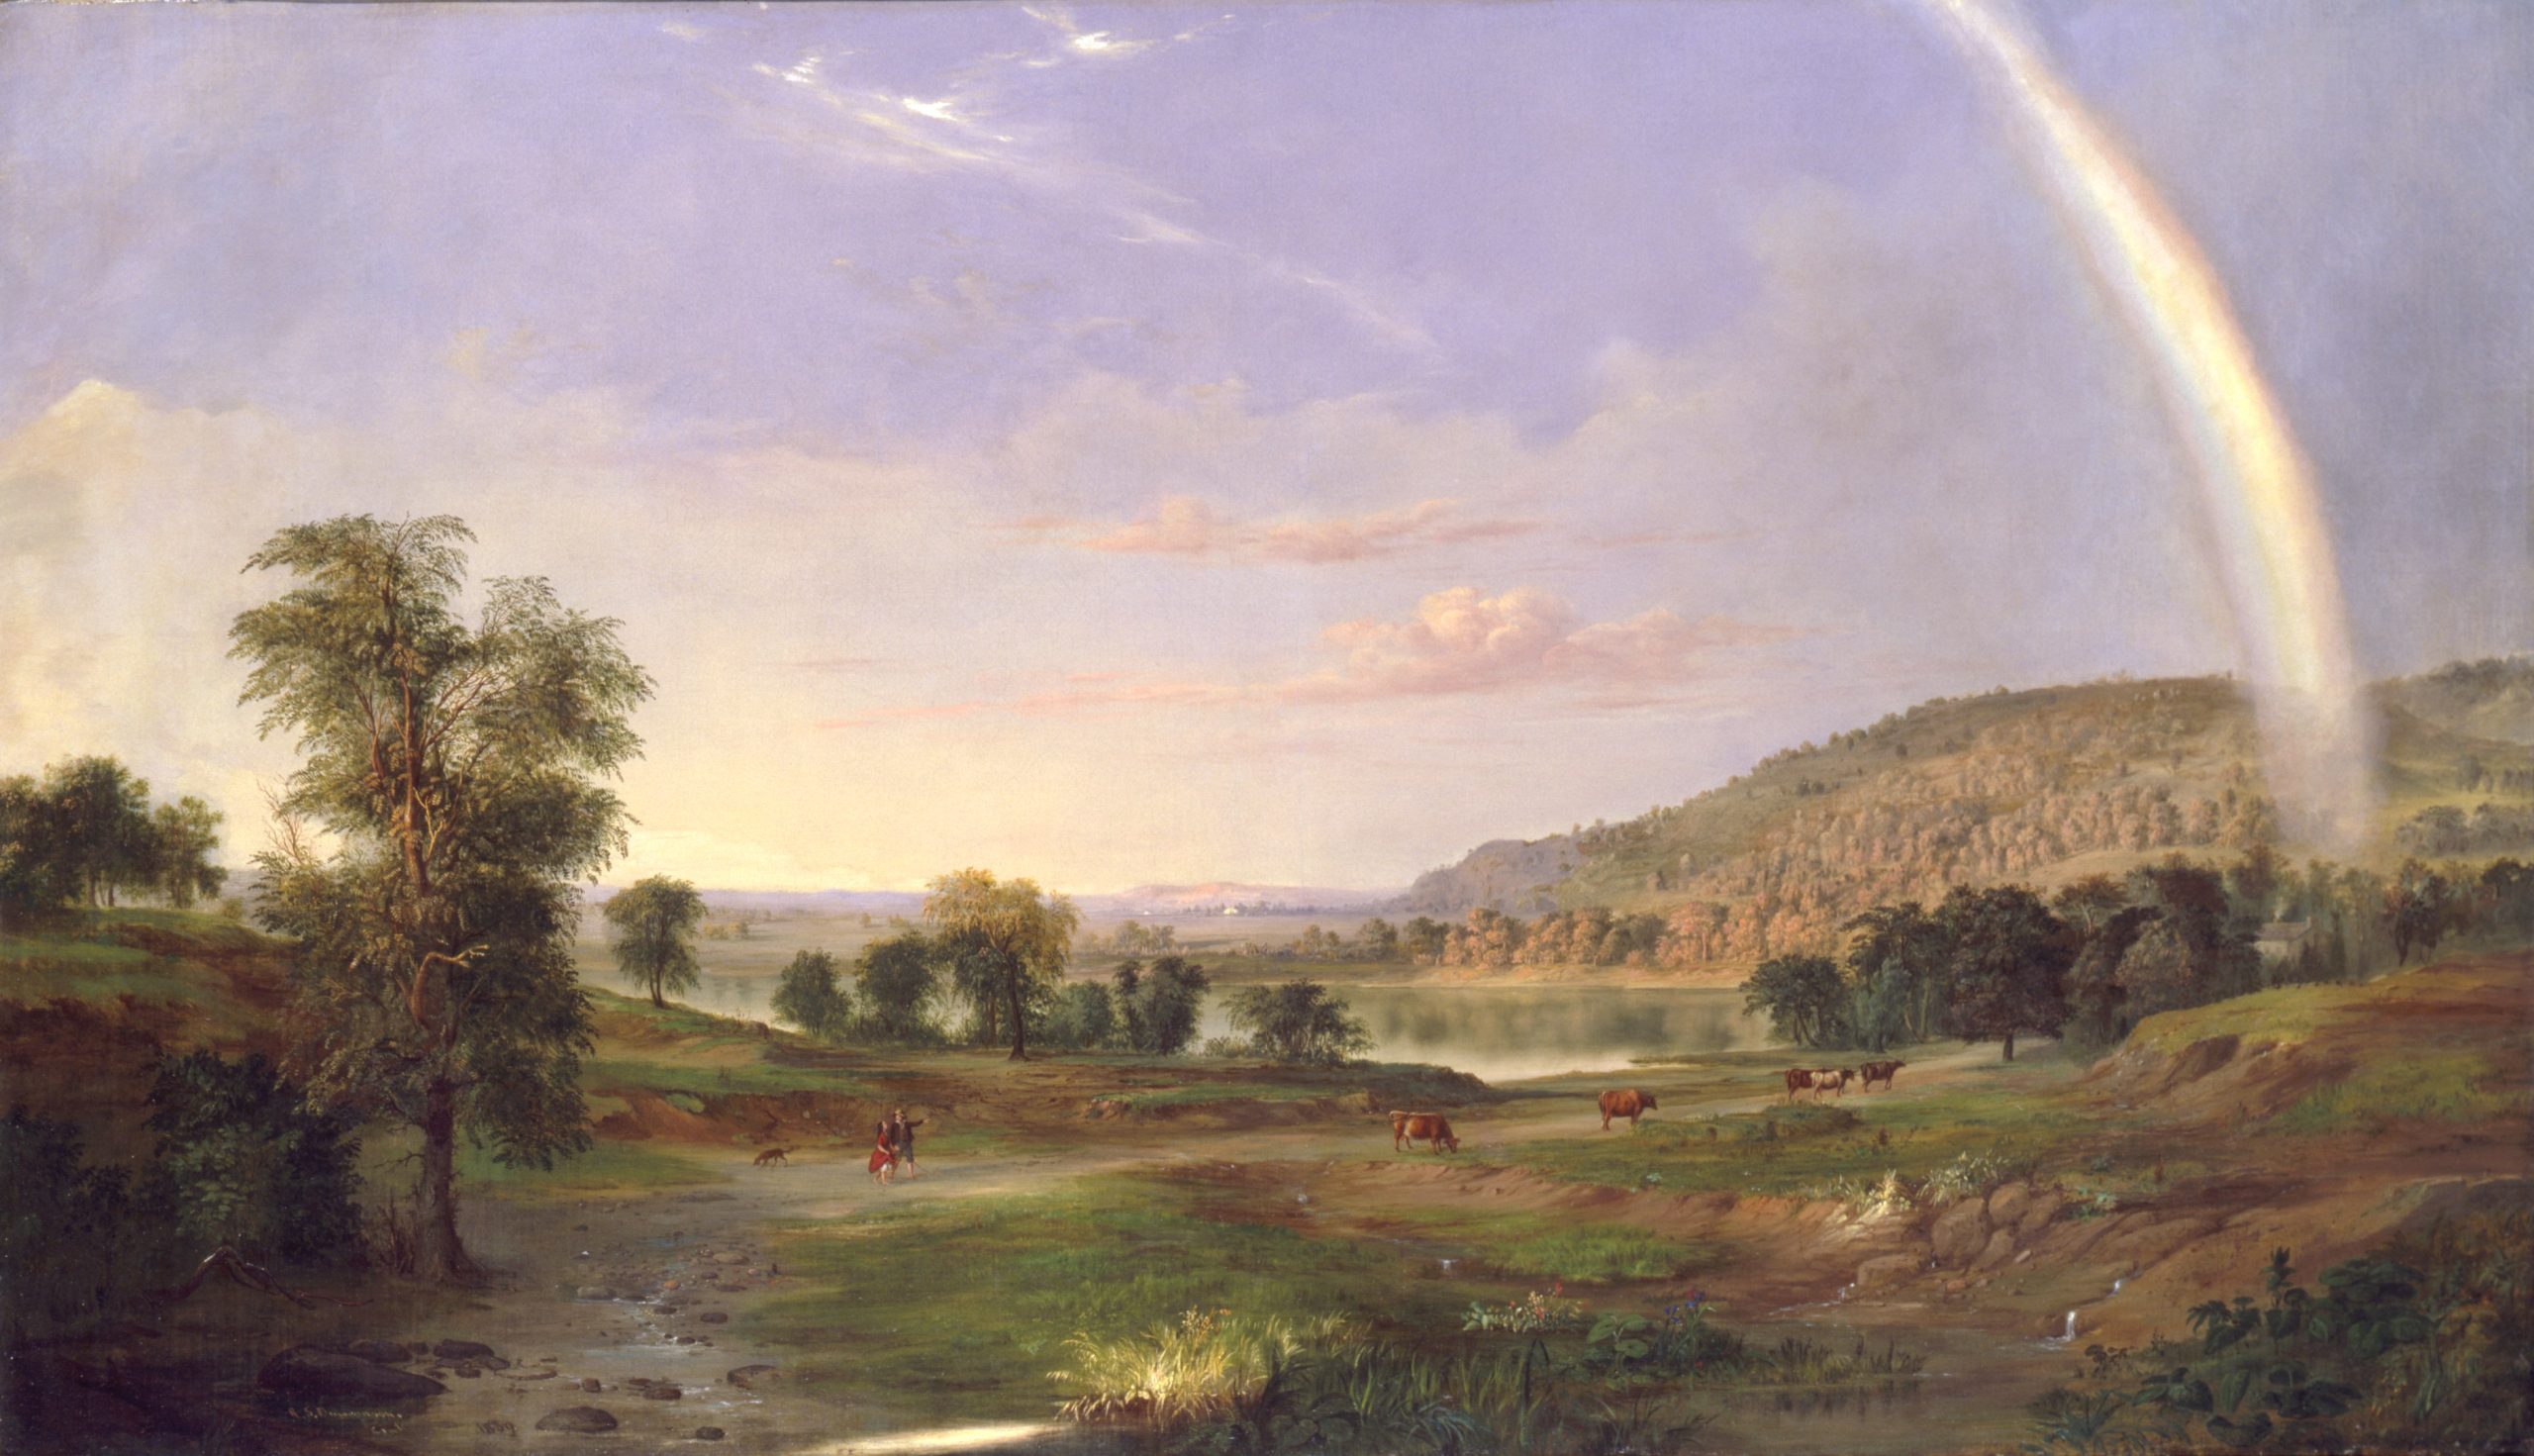 A classical landscape with a rainbow in the sky